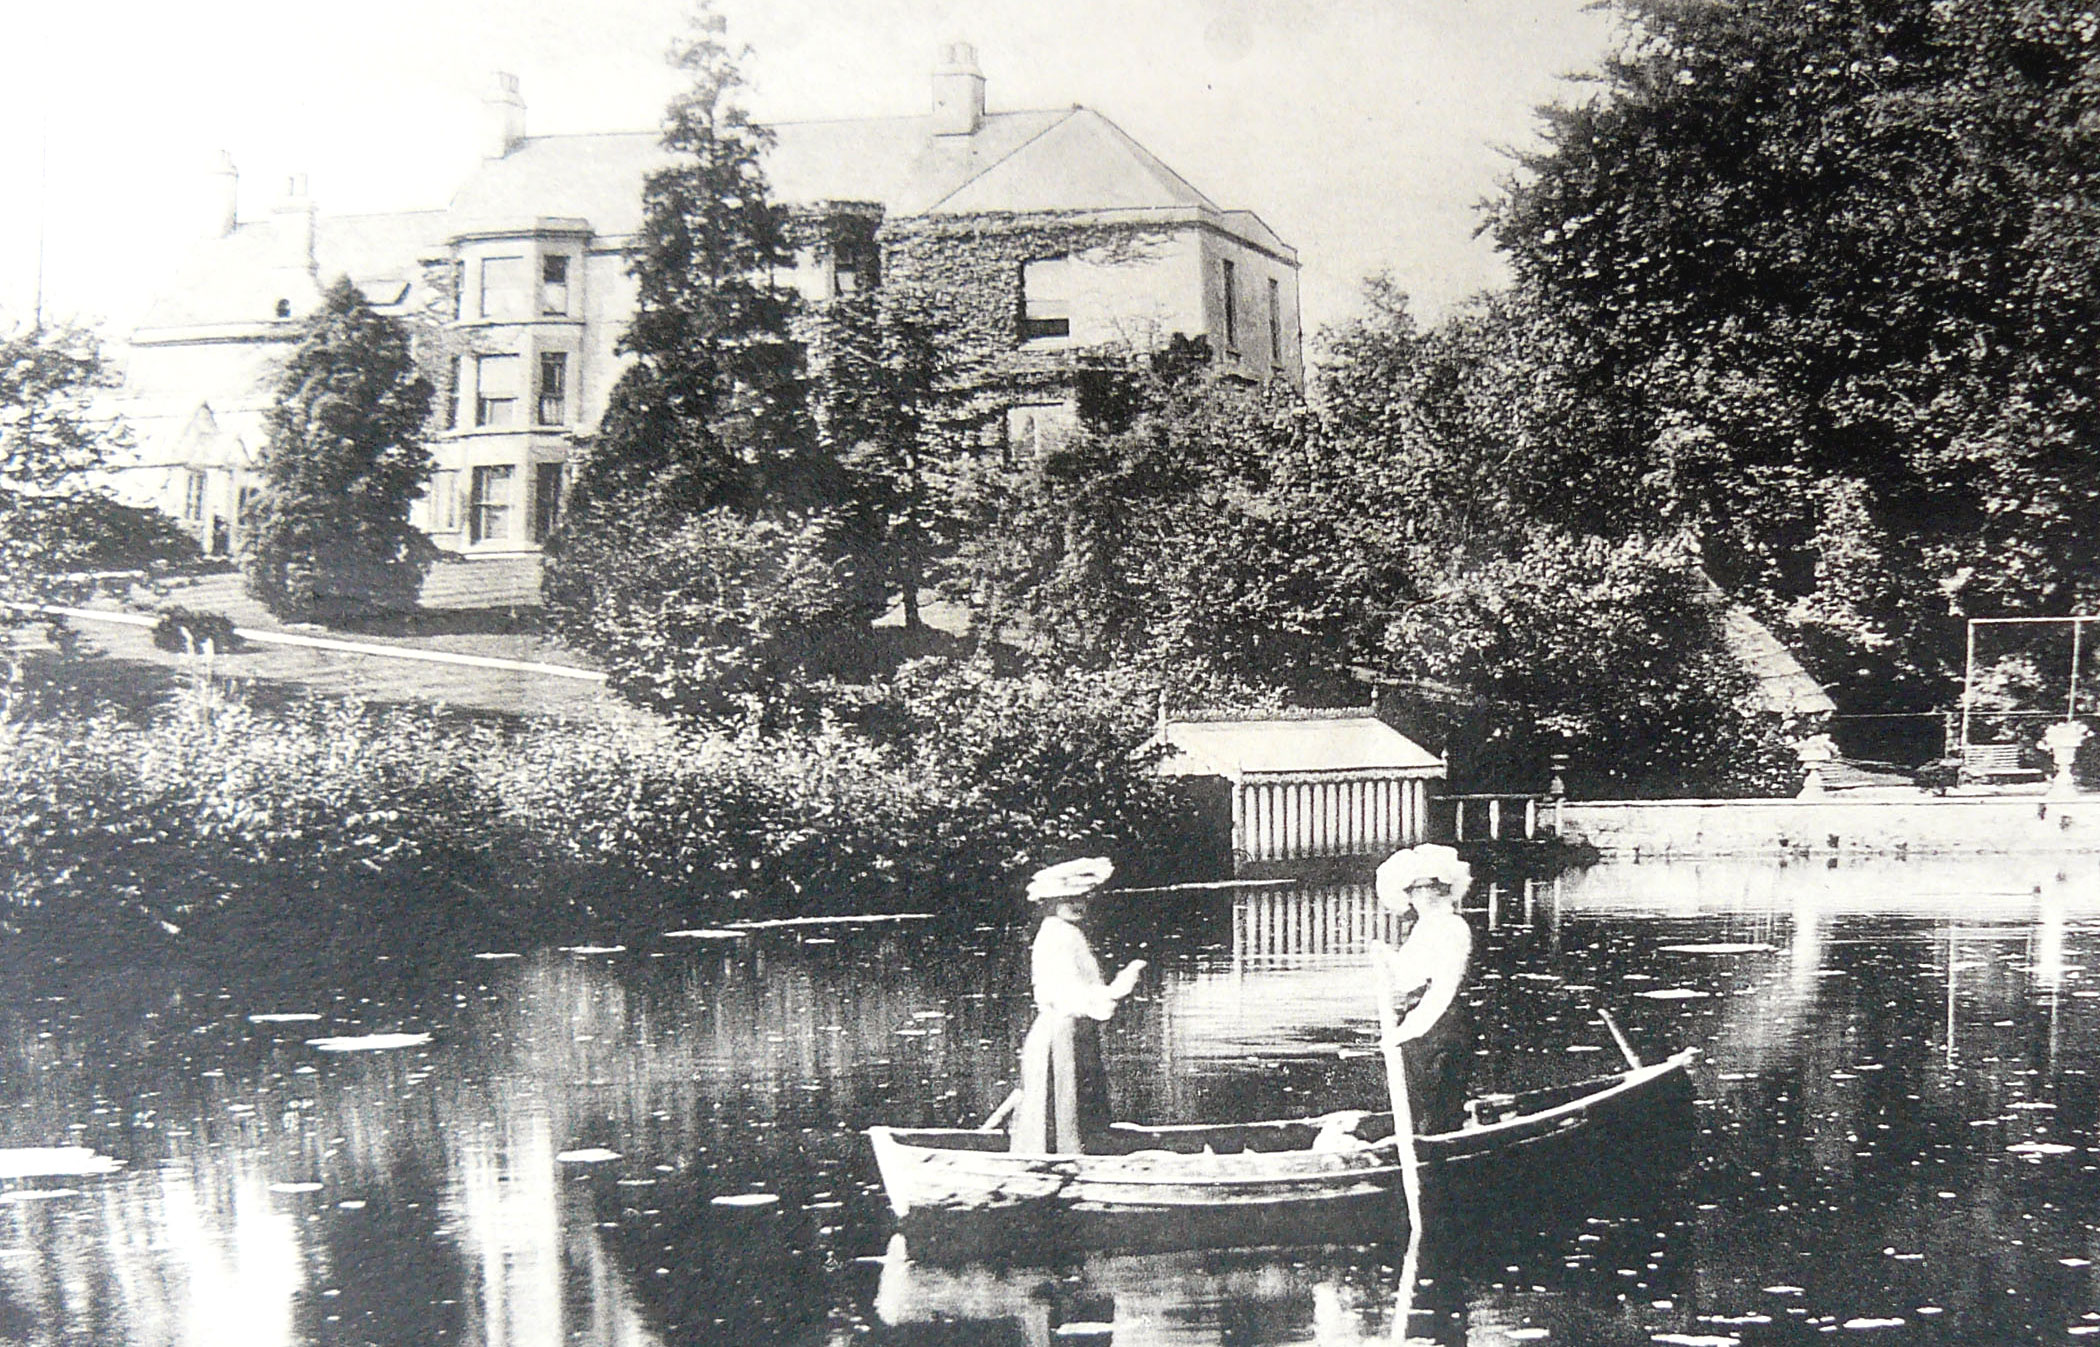 Lake at the Lawn, Cainscross, 1904. (Gloucestershire Archives D1405/5/2)